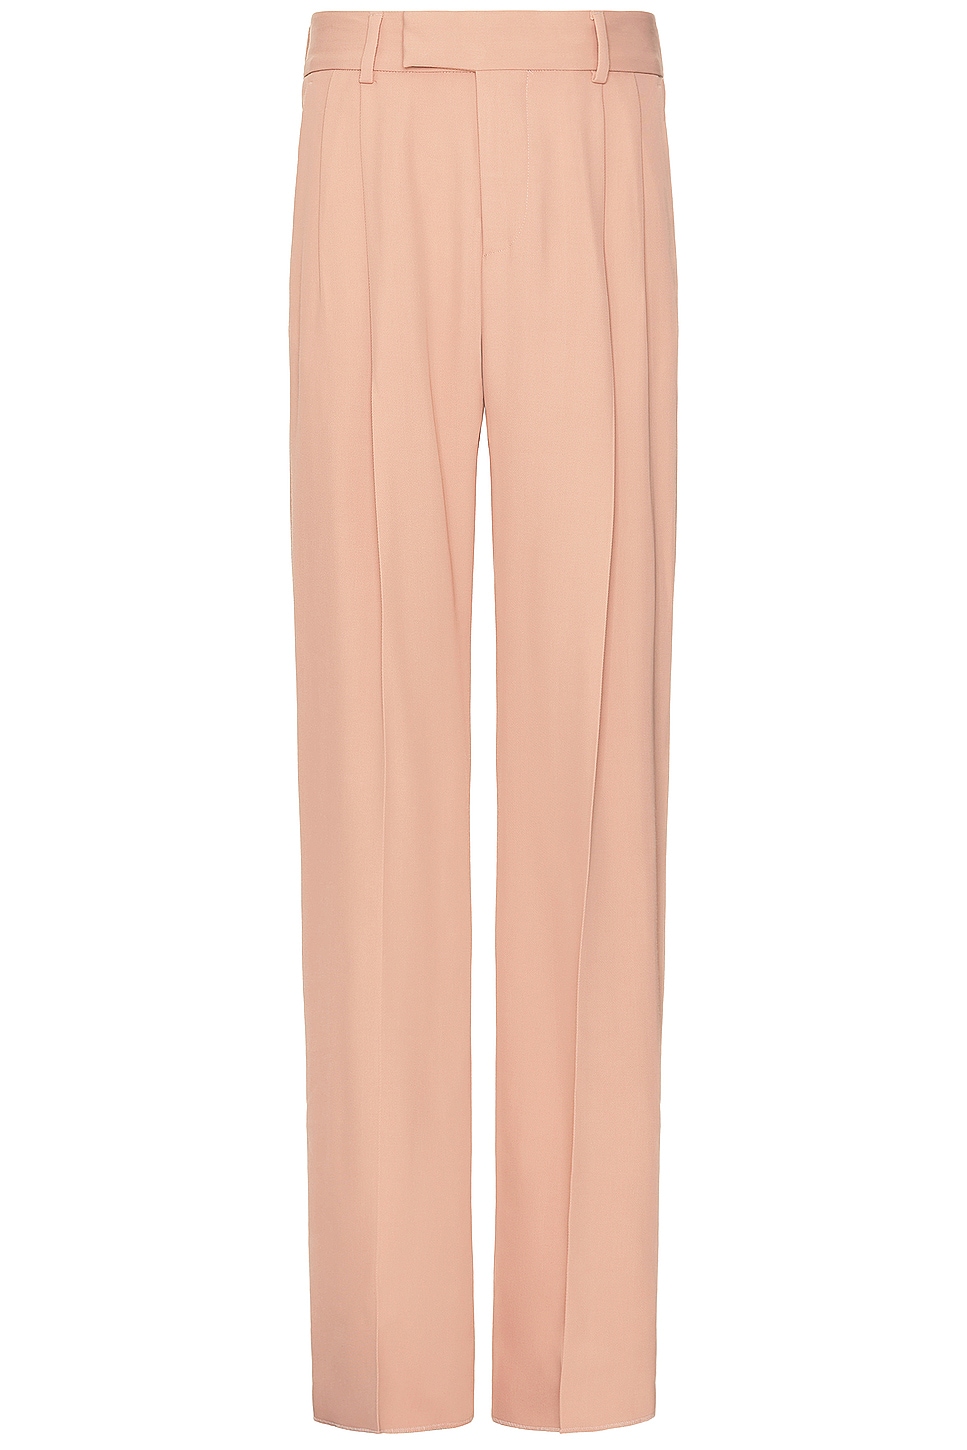 Image 1 of Amiri Double Pleated Pant in Cork